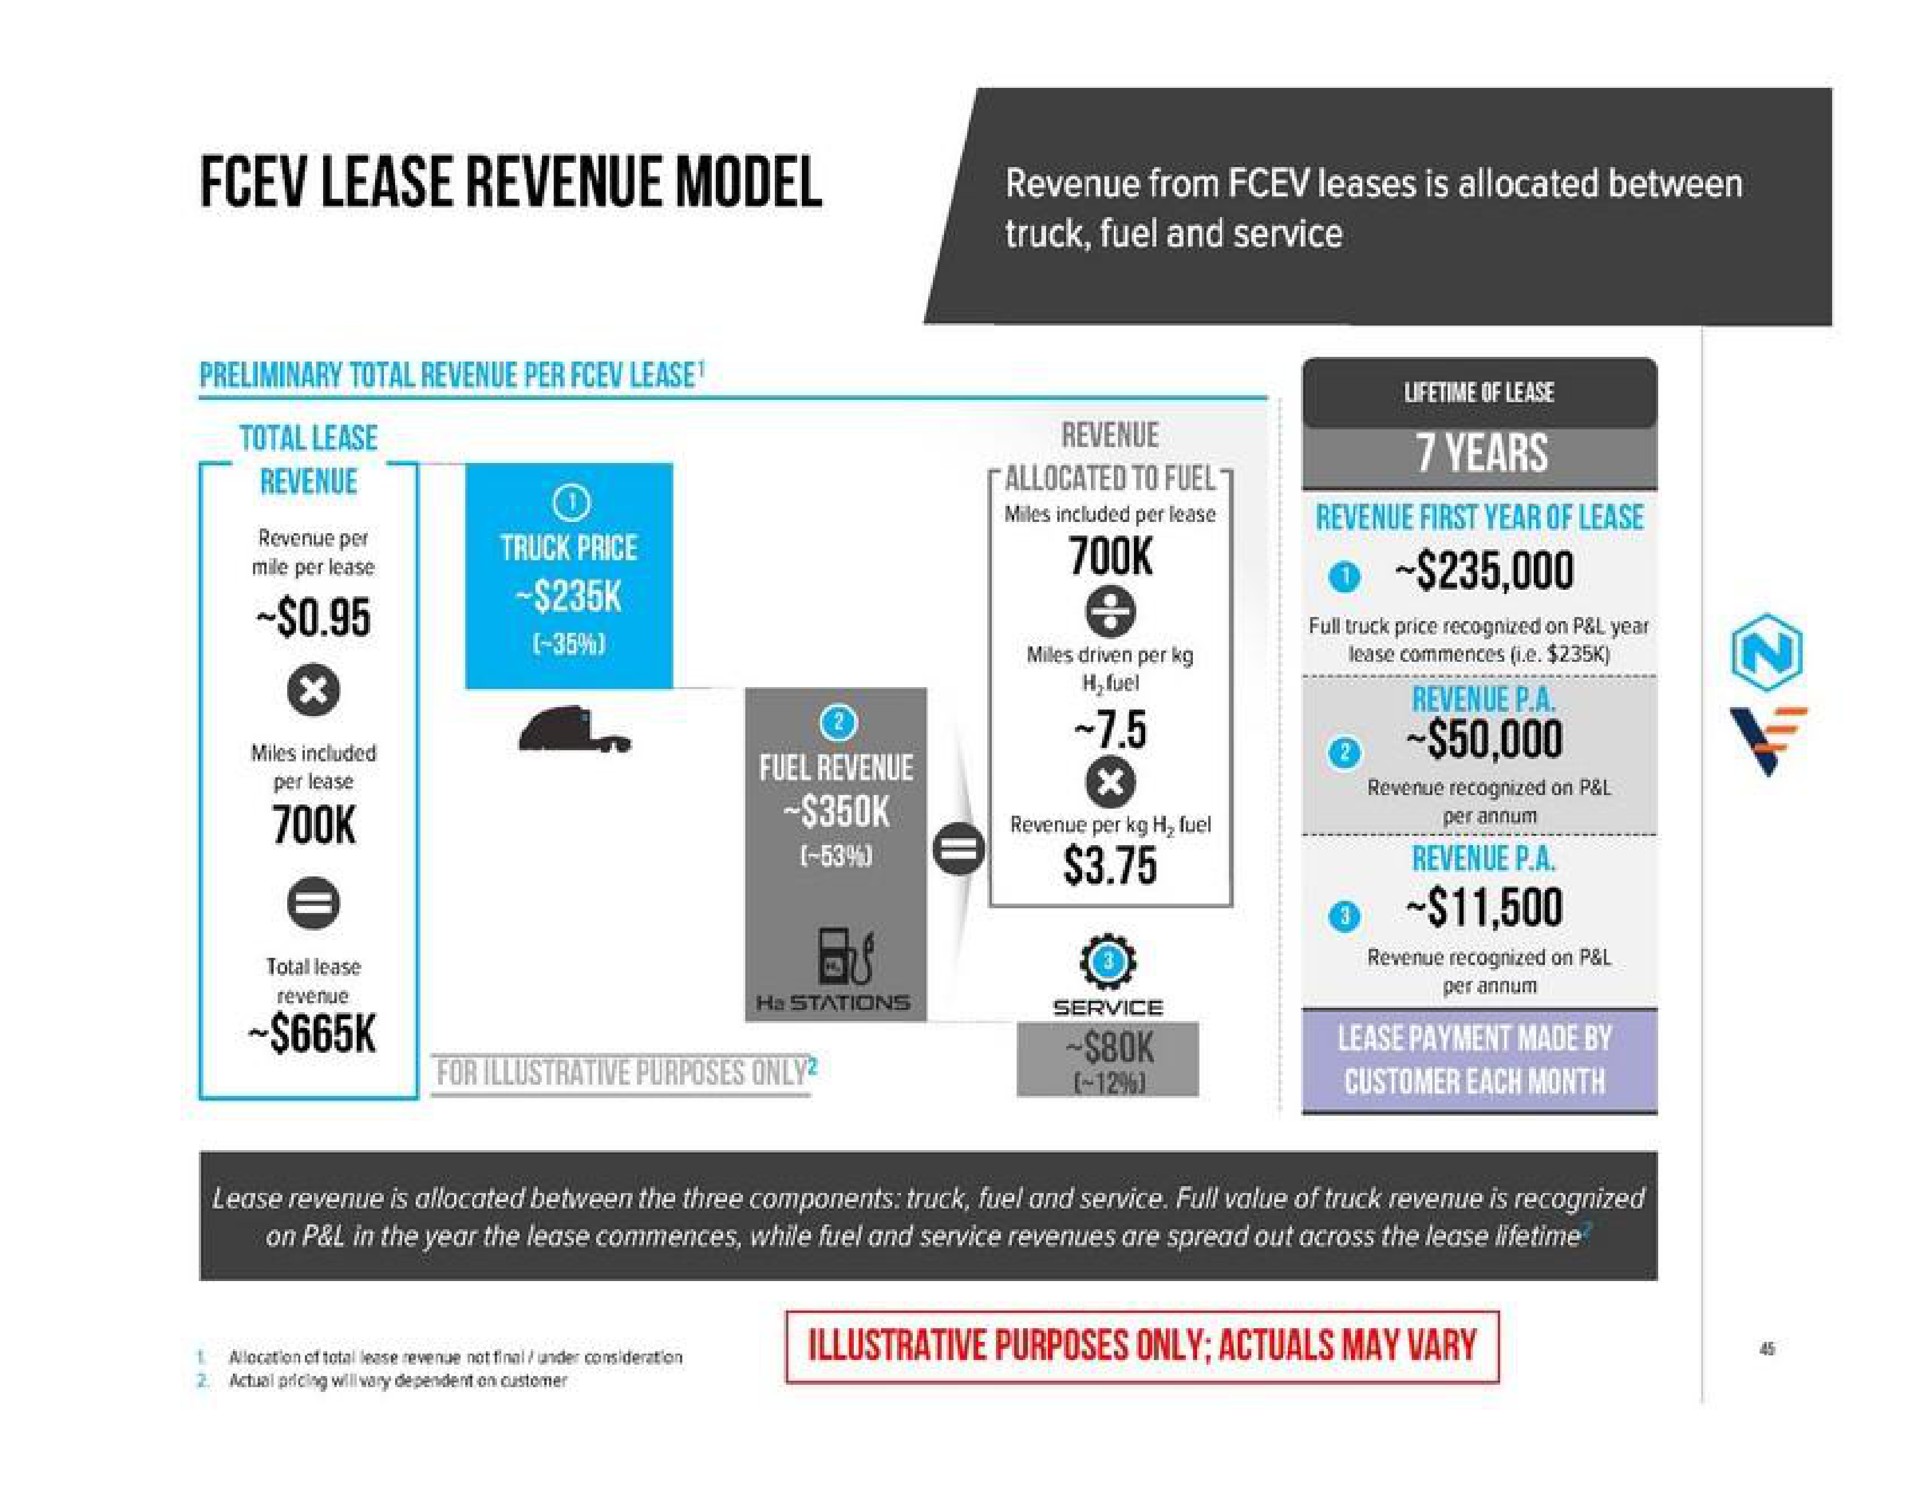 lease revenue model pals revenue first year of lease revenue a a illustrative purposes only may vary | Nikola